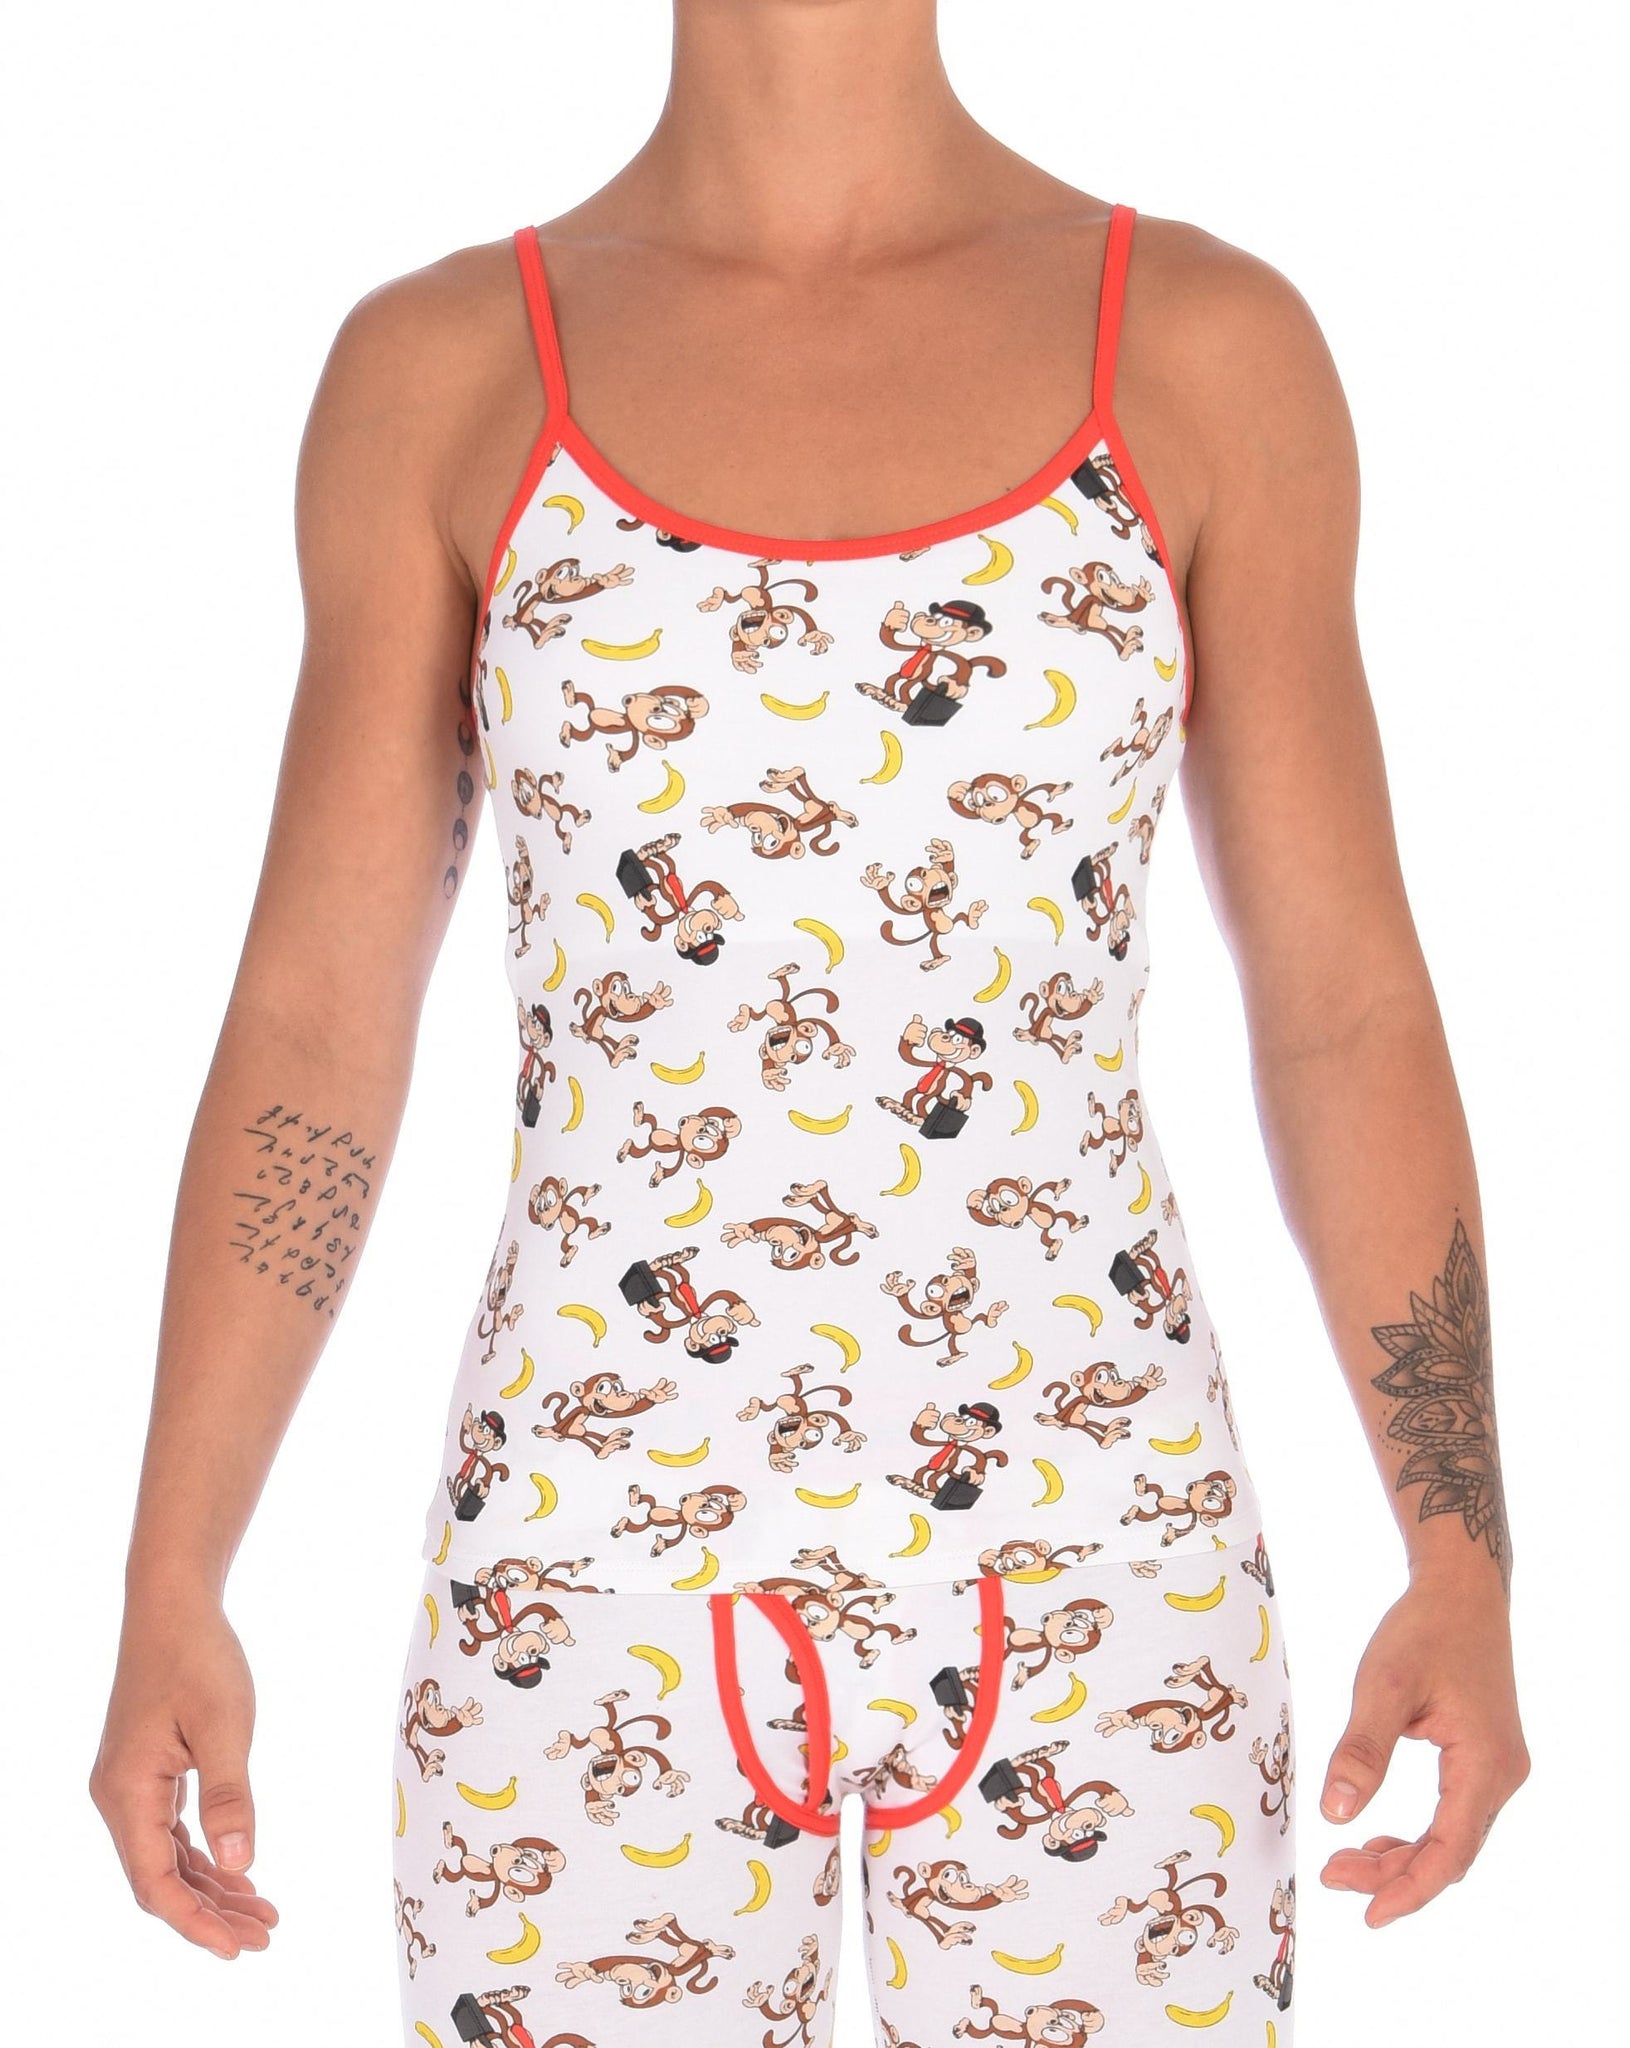 GG Ginch Gonch Gone Bananas cami camisole spaghetti strap women's long underwear white fabric with monkeys and bananas red trim front shown with matching y front leggings